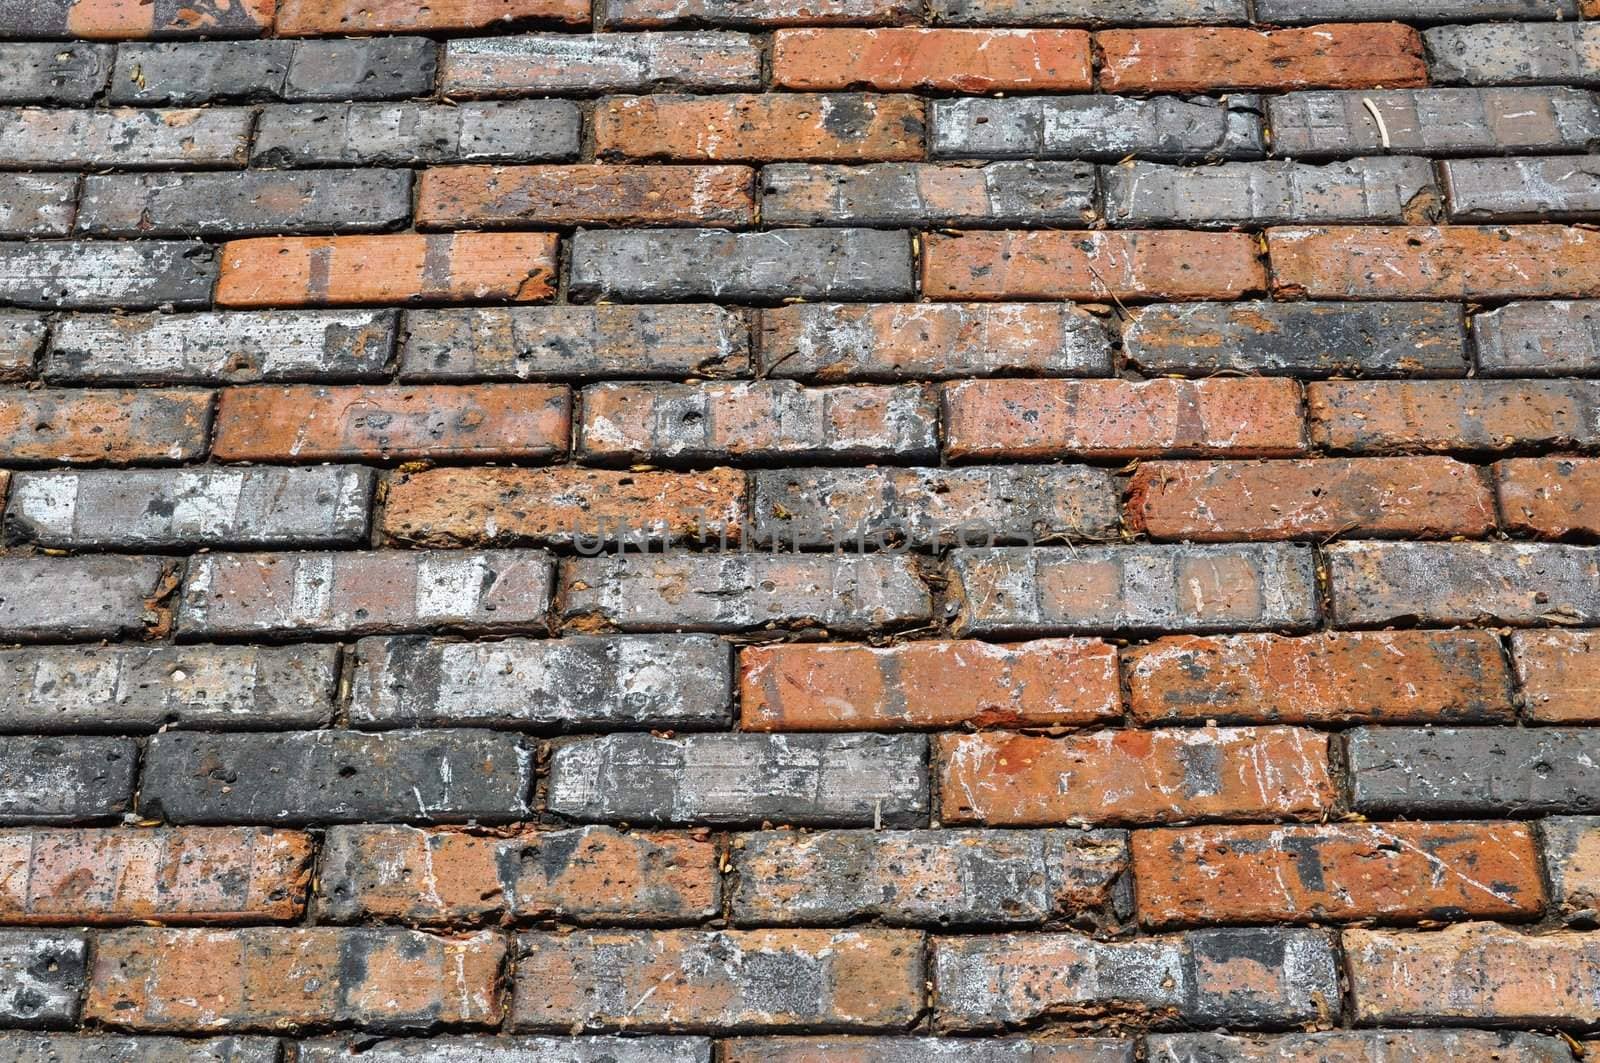 Brick Wall Background by RefocusPhoto